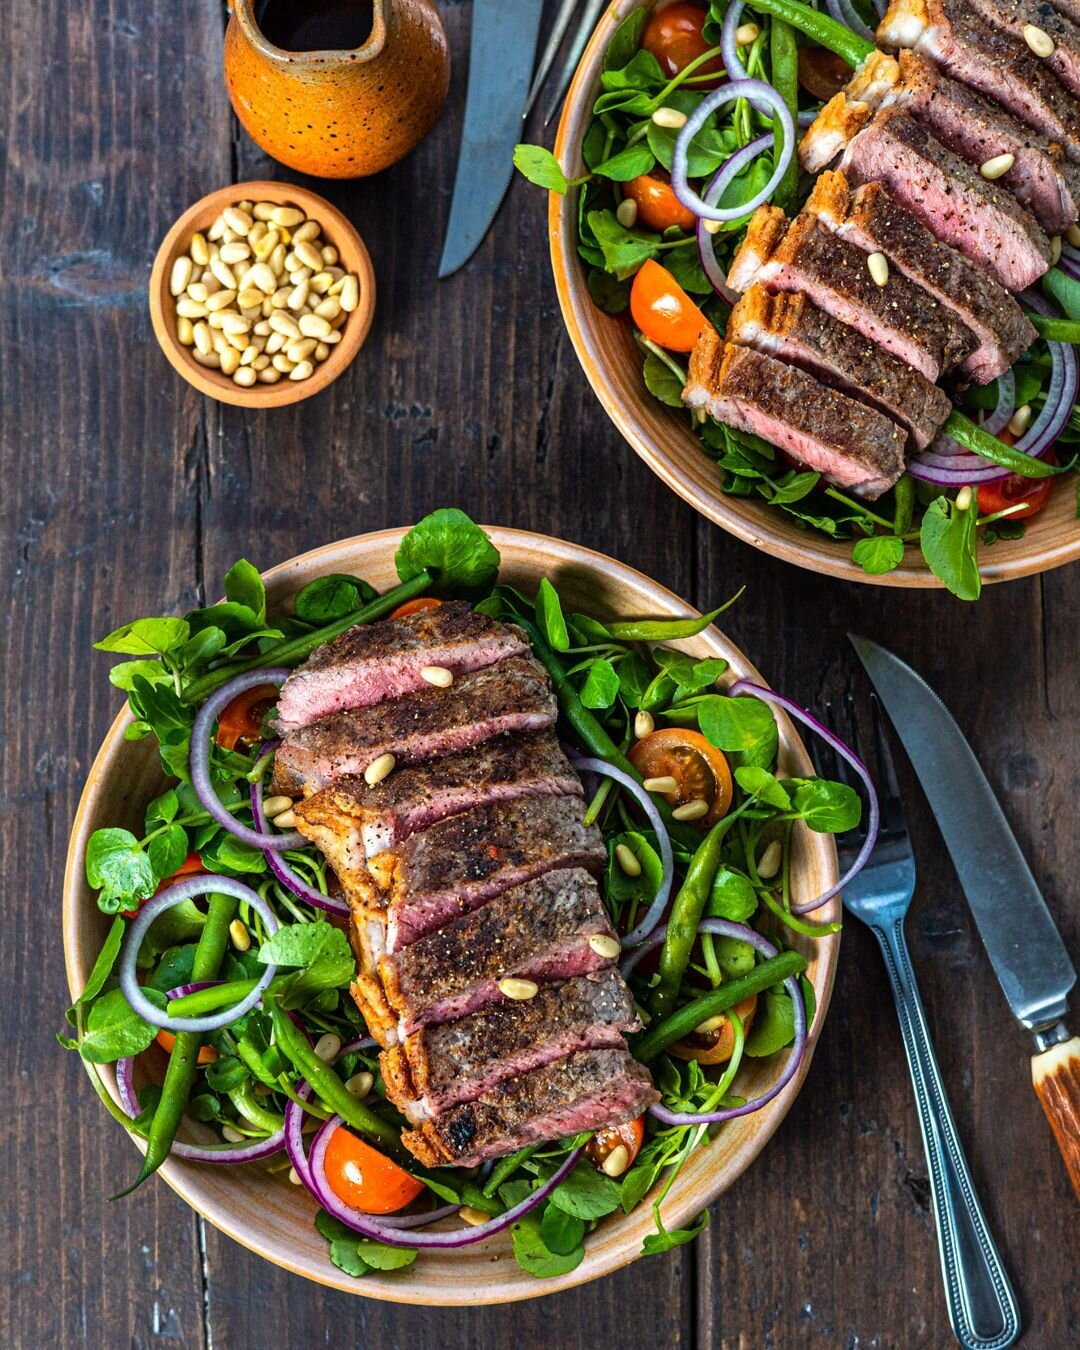 Sweet and spicy flavours 🤝

Chilli chocolate dressing drizzled over a perfectly cooked steak is phenomenal. 

This salad is perfect for a light dinner on a balmy evening:

- 1 nice piece of your favourite steak
- 80g watercress
- 100g Cherry tomatoe